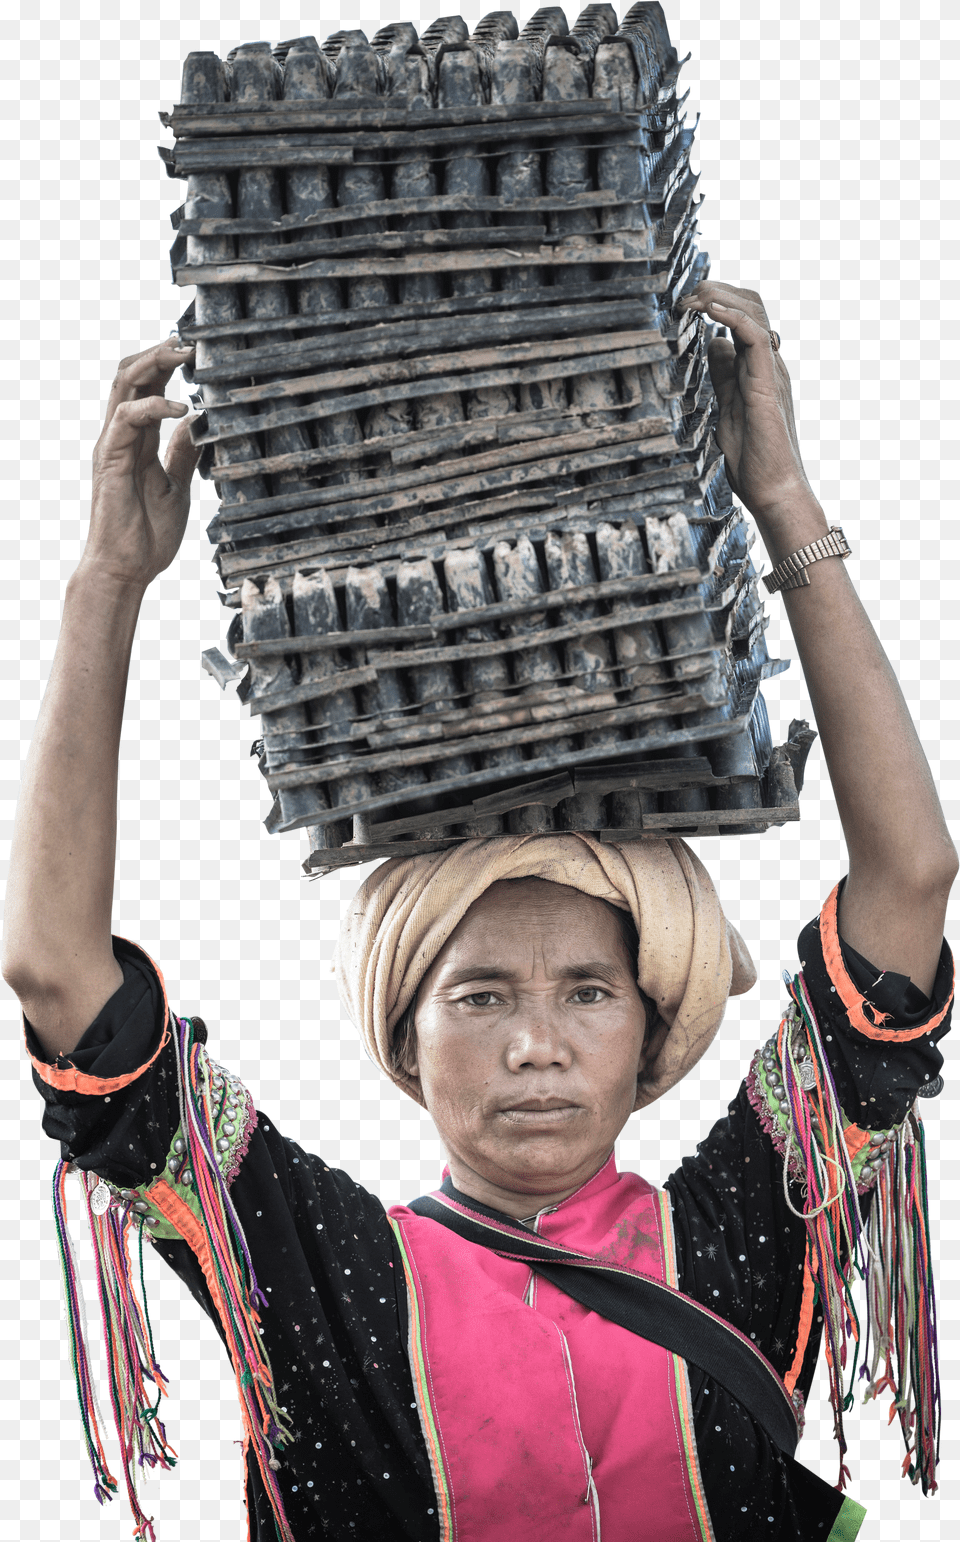 Woman Holding Paper Egg Tray Tradition Png Image